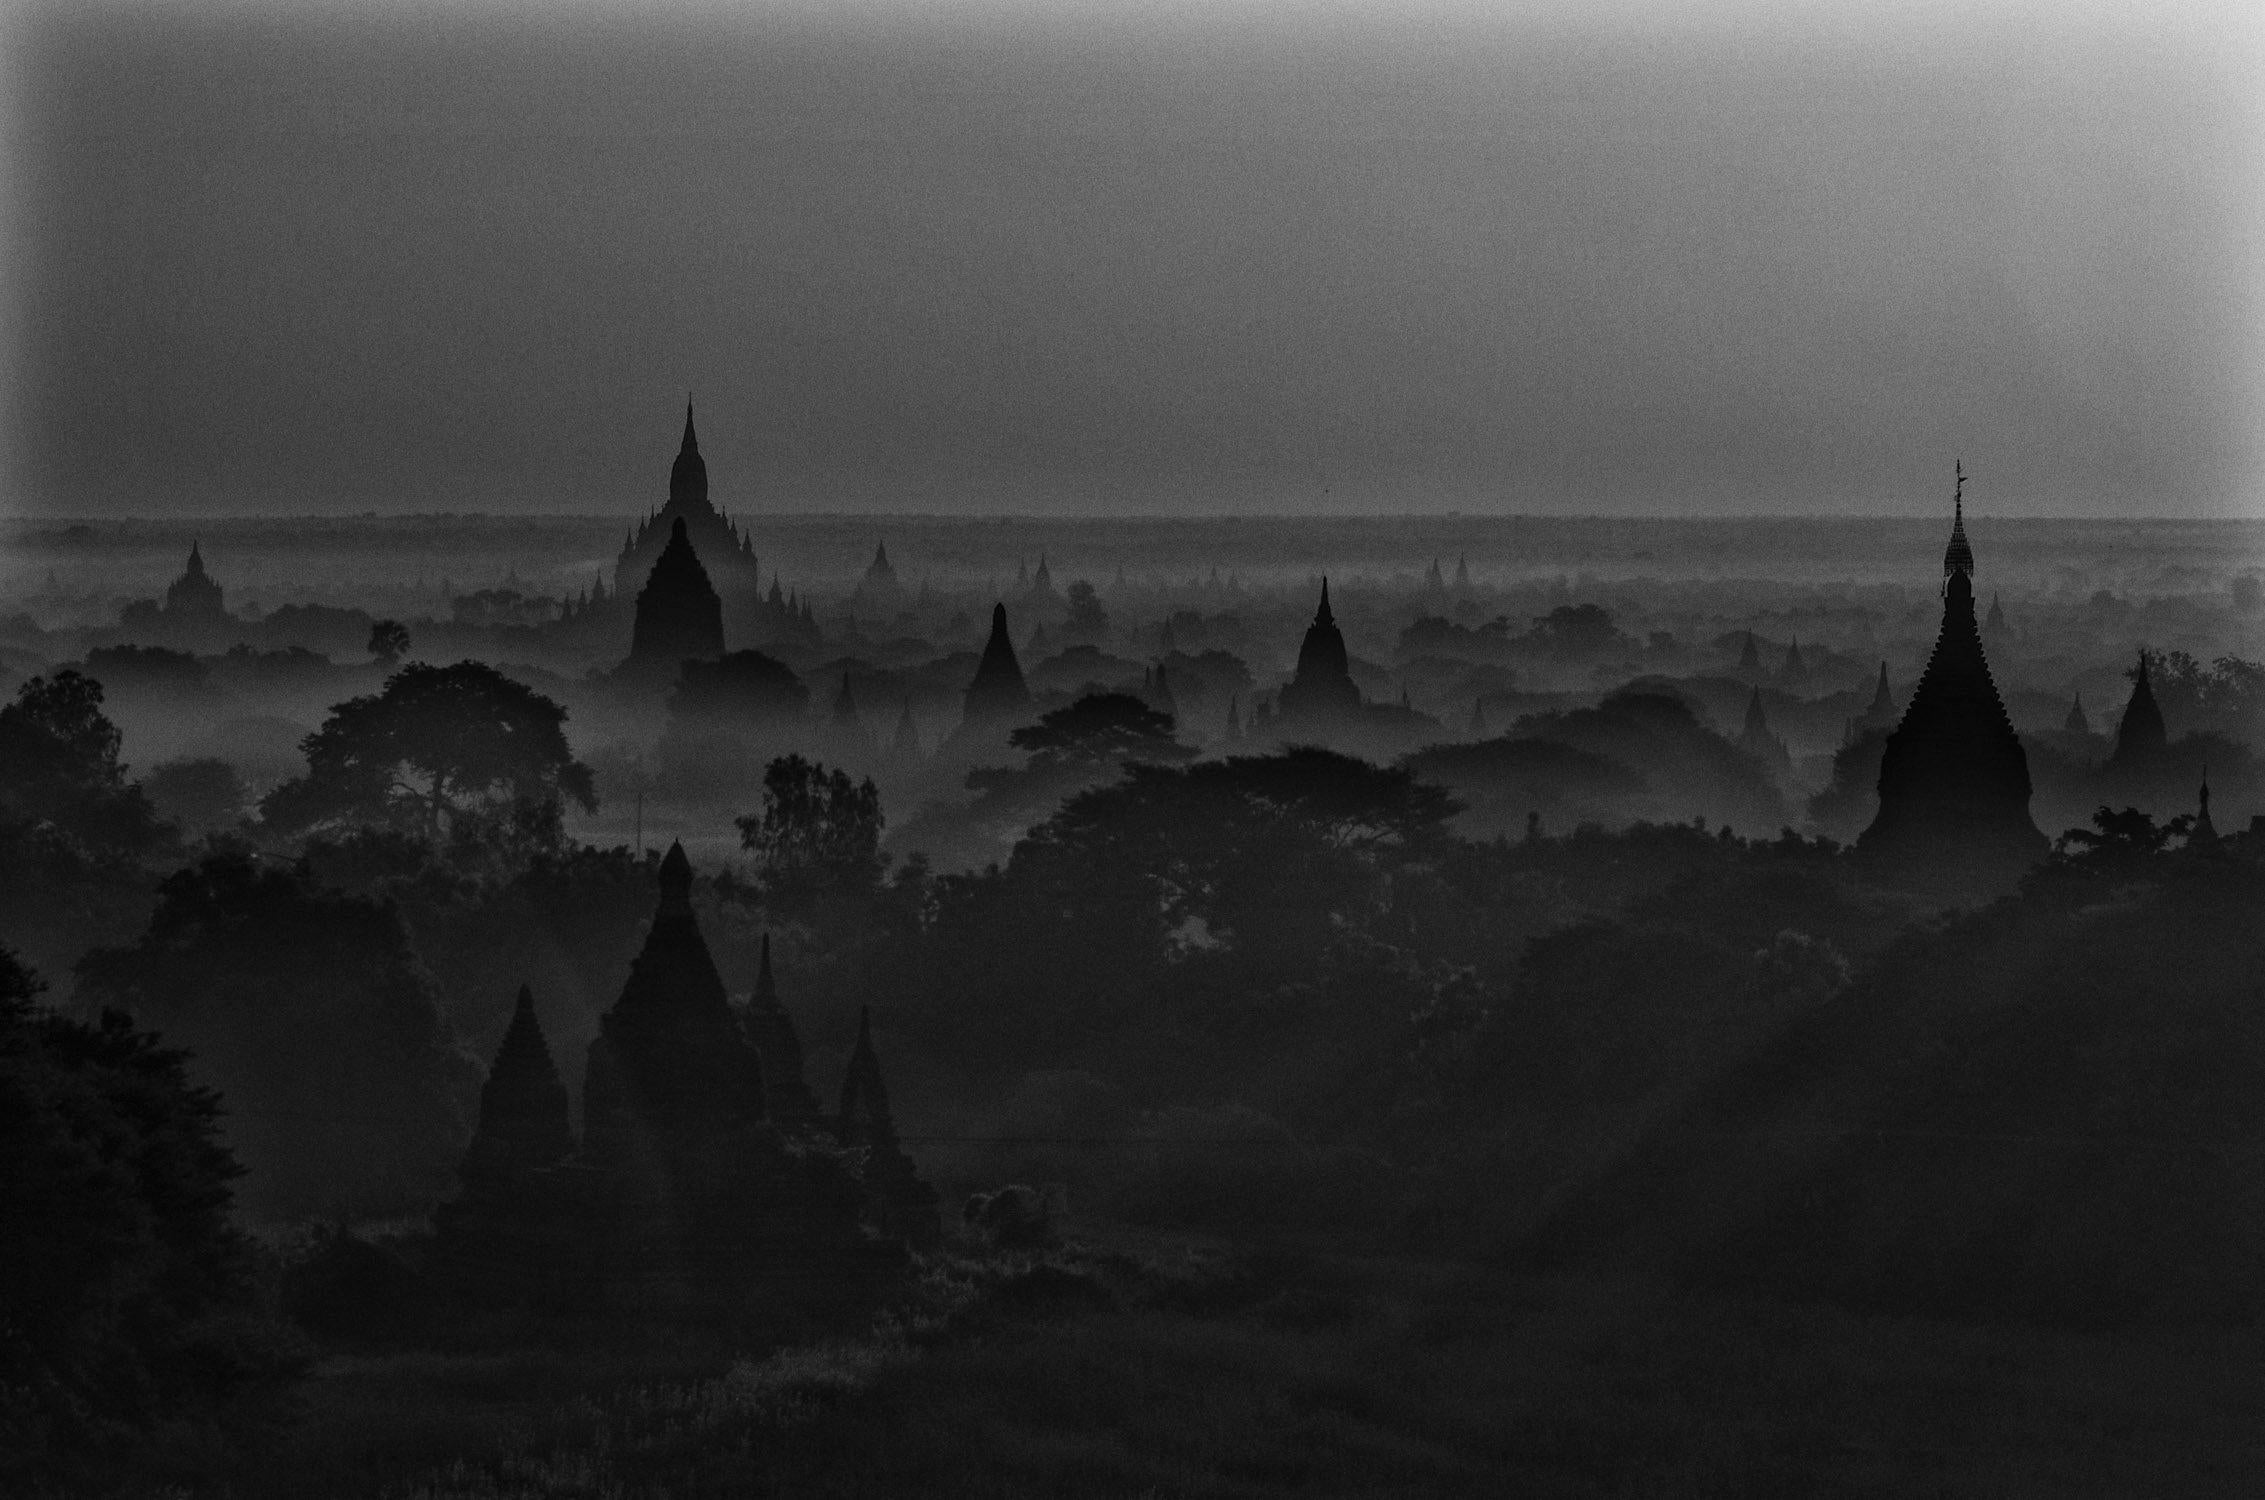 The light of the moon creates an otherworldly ethereal world, a stillness and calm across the spiritual landscaper of the Bagan valley in Burma.

James Sparshatt’s black and white landscapes have an ethereal beauty. They are moments when the natural